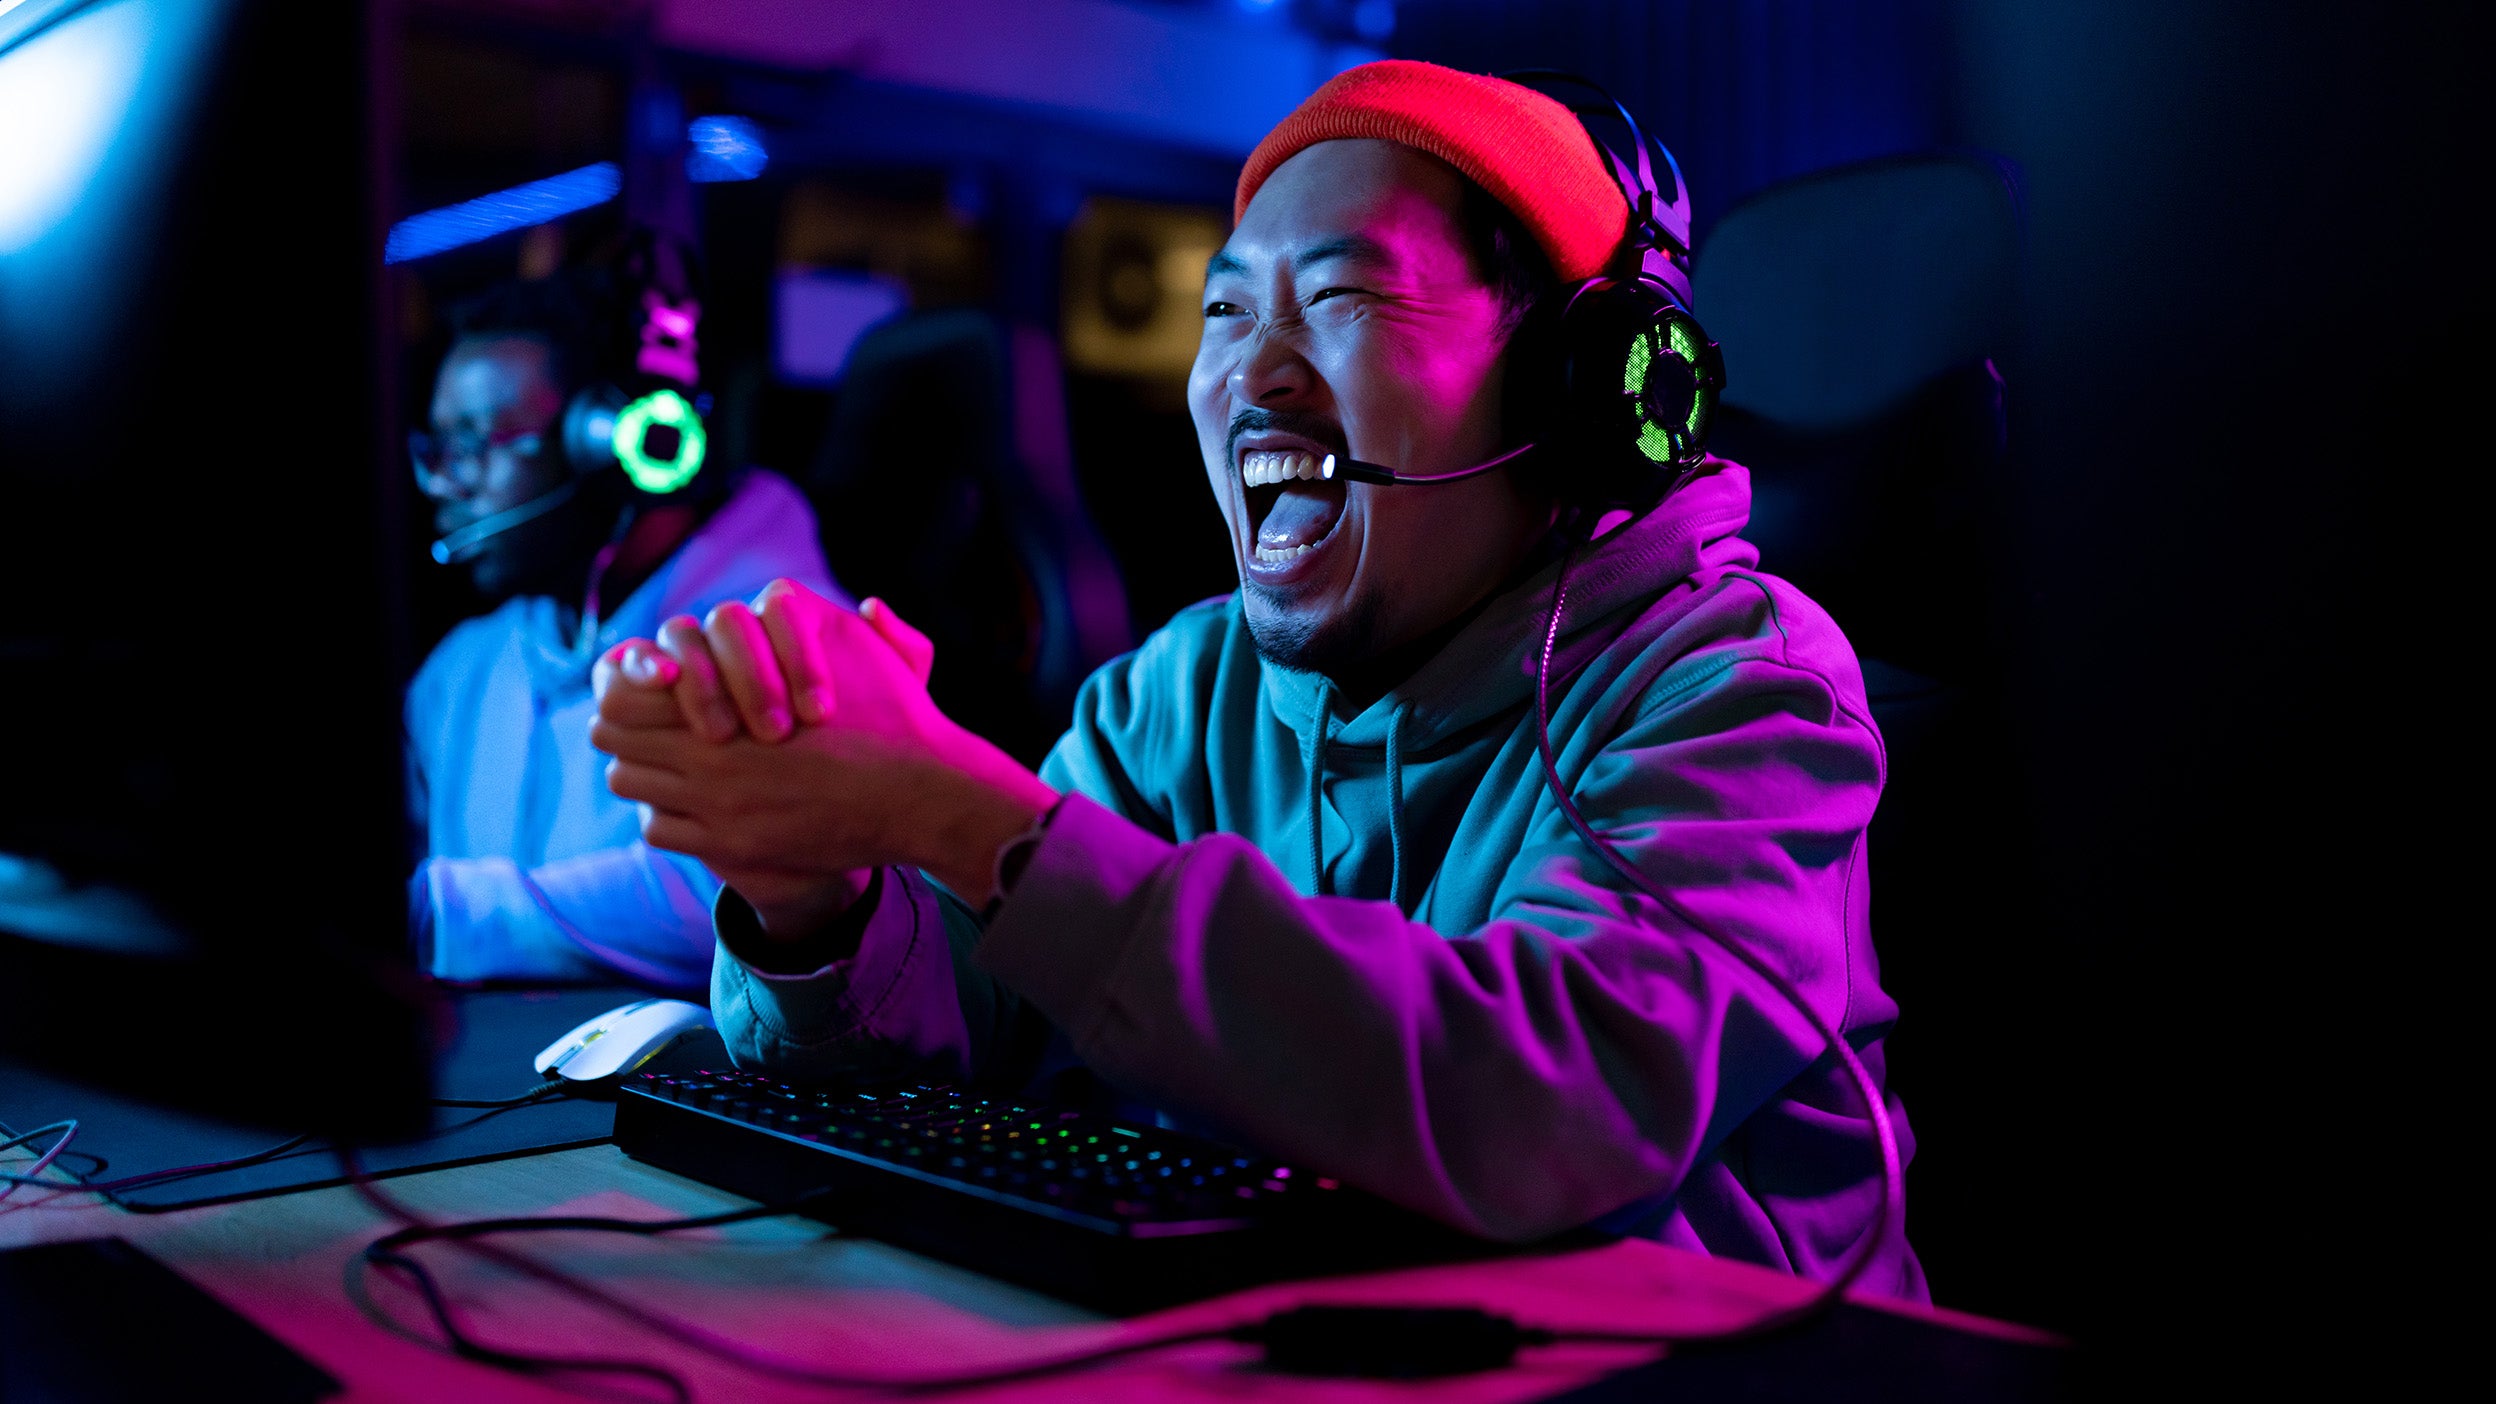 Man celebrates in front of a gaming computer, one of the technologies impacted by AI, which is reshaping companies within the underlying holdings of Invesco QQQ ETF. 